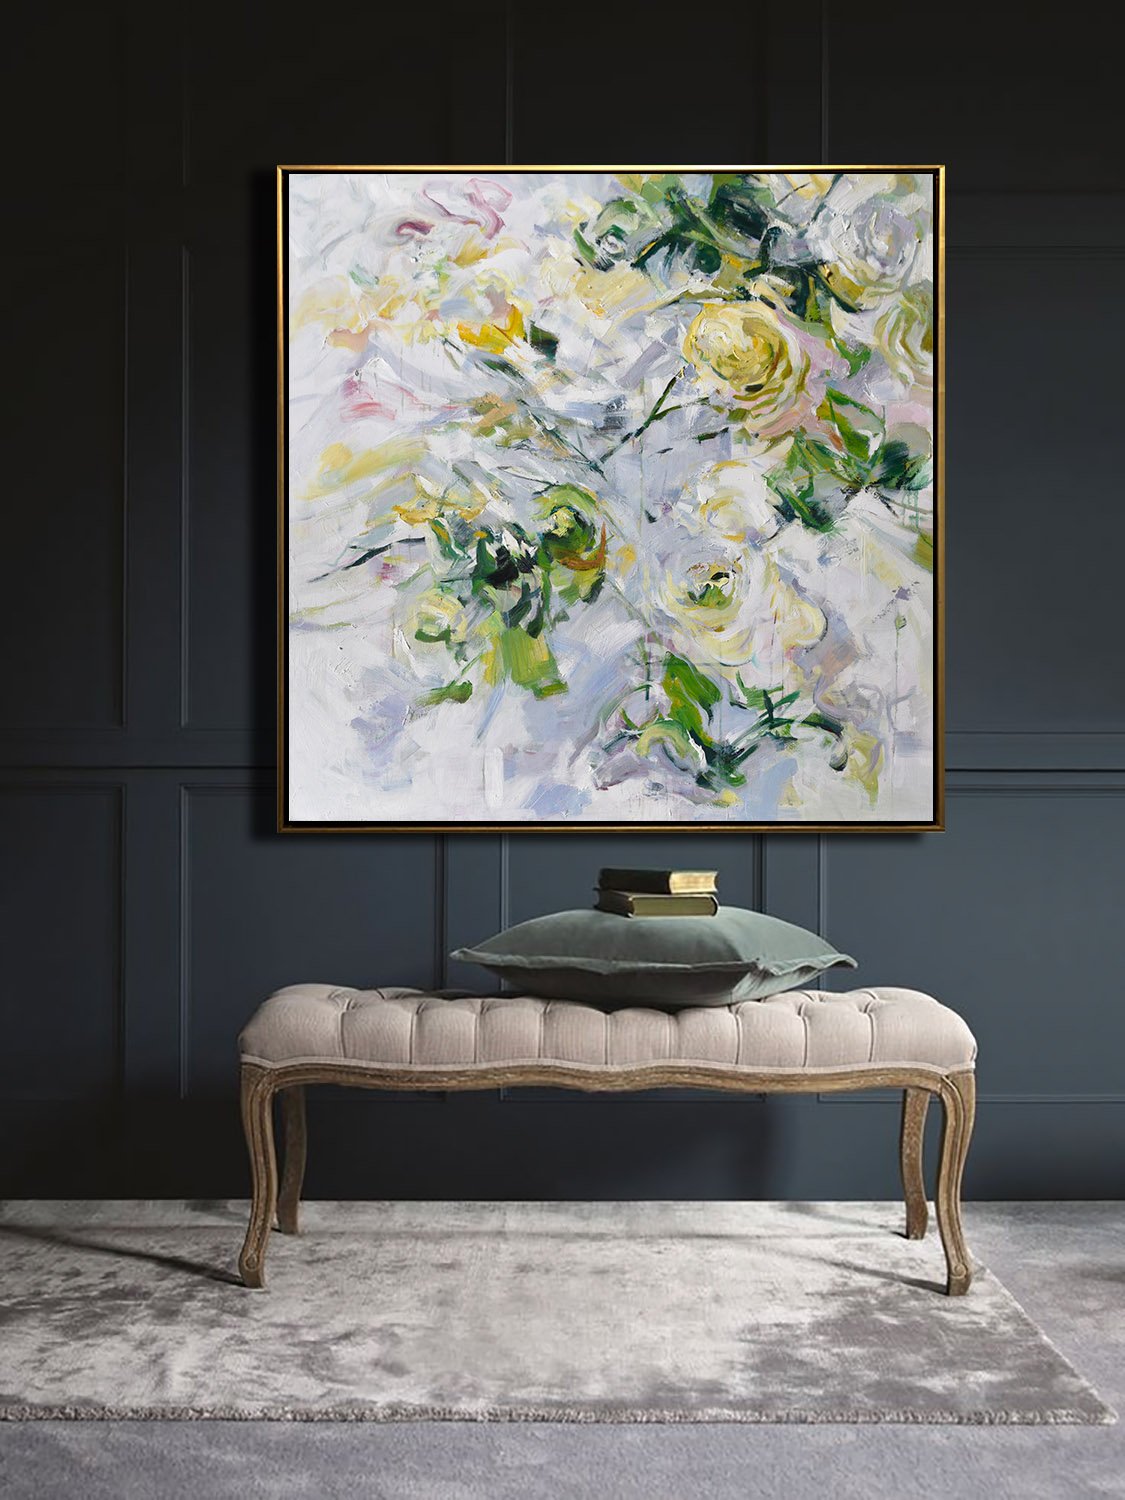 Large Abstract Art Handmade Painting,Oversized Abstract Flower Oil Painting,Handmade Acrylic Painting